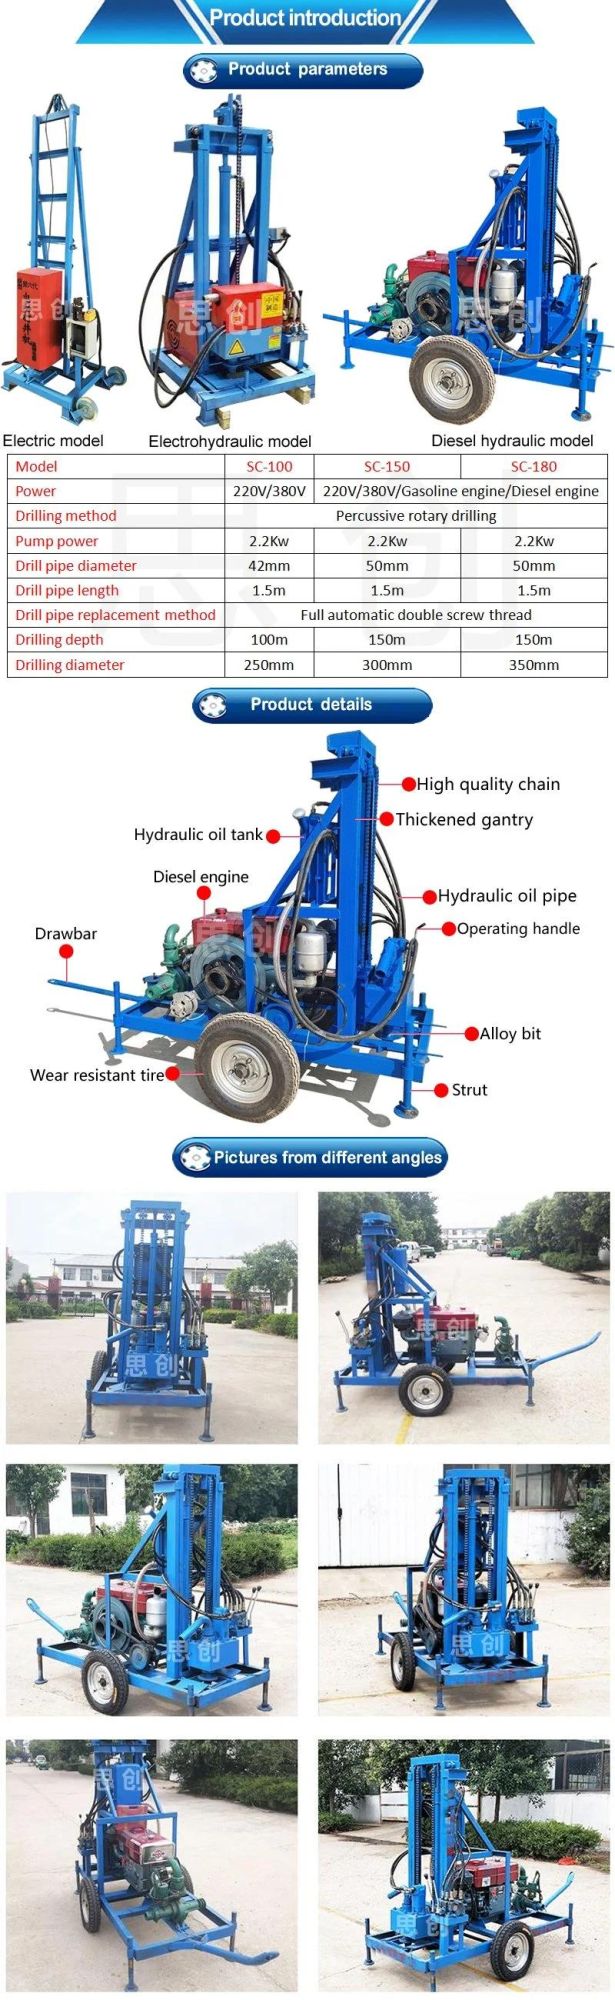 200 Meters Borehole Water Well Drilling Machine with Electric Start